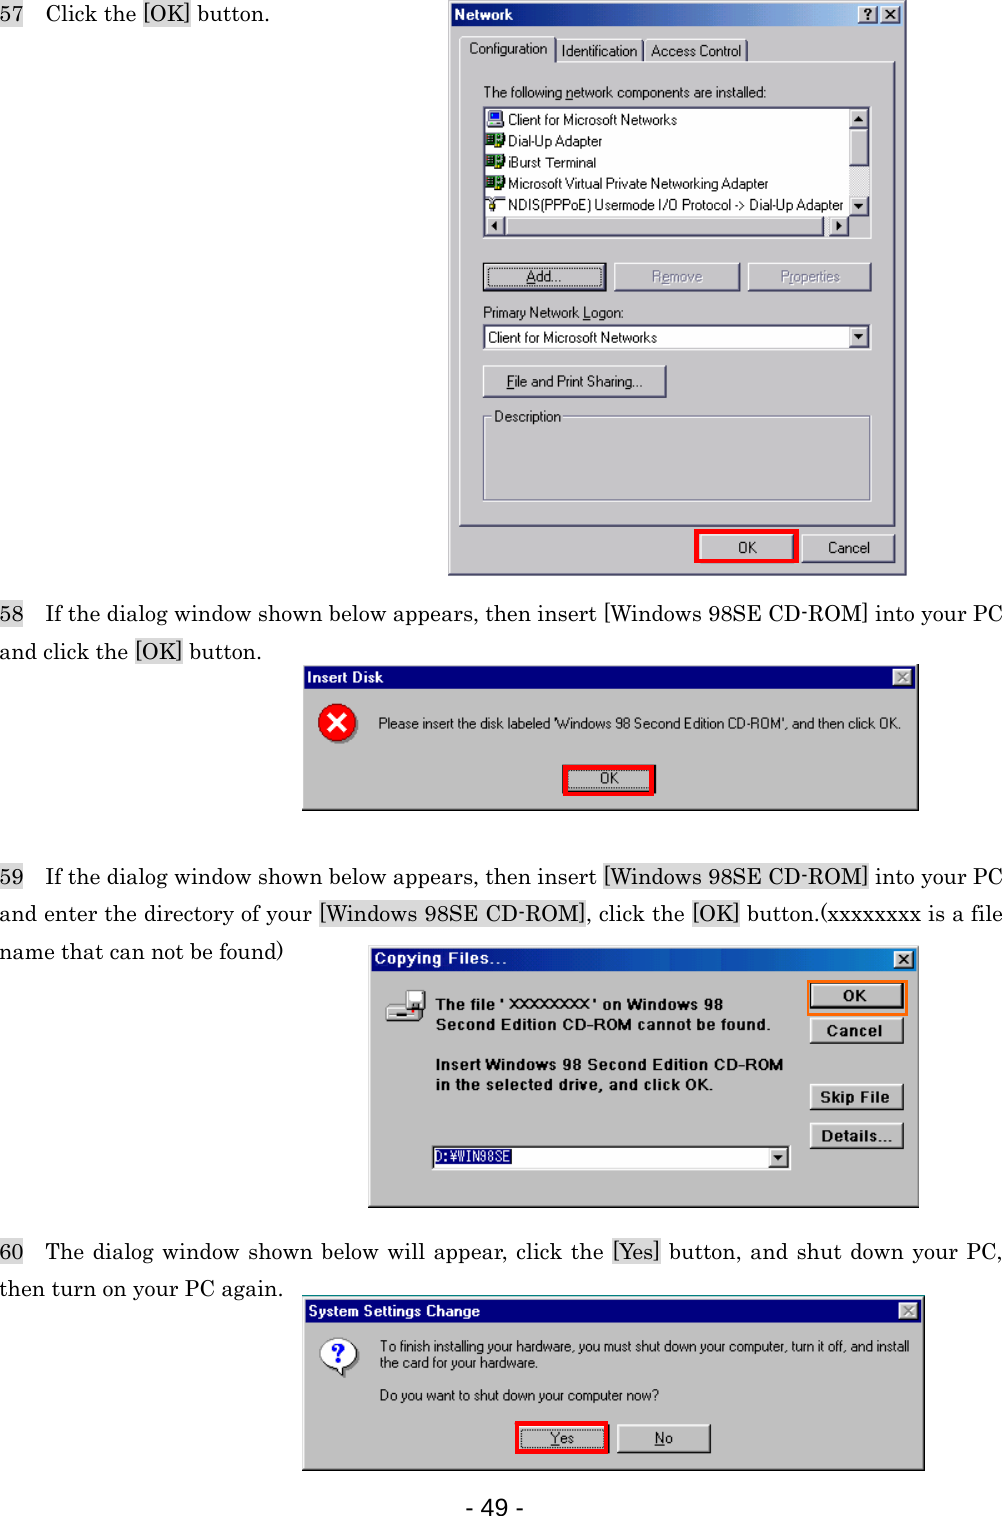 57    Click the [OK] button.                58    If the dialog window shown below appears, then insert [Windows 98SE CD-ROM] into your PC and click the [OK] button.      59    If the dialog window shown below appears, then insert [Windows 98SE CD-ROM] into your PC and enter the directory of your [Windows 98SE CD-ROM], click the [OK] button.(xxxxxxxx is a file name that can not be found)        60  The dialog window shown below will appear, click the [Yes] button, and shut down your PC, then turn on your PC again.     - 49 -  